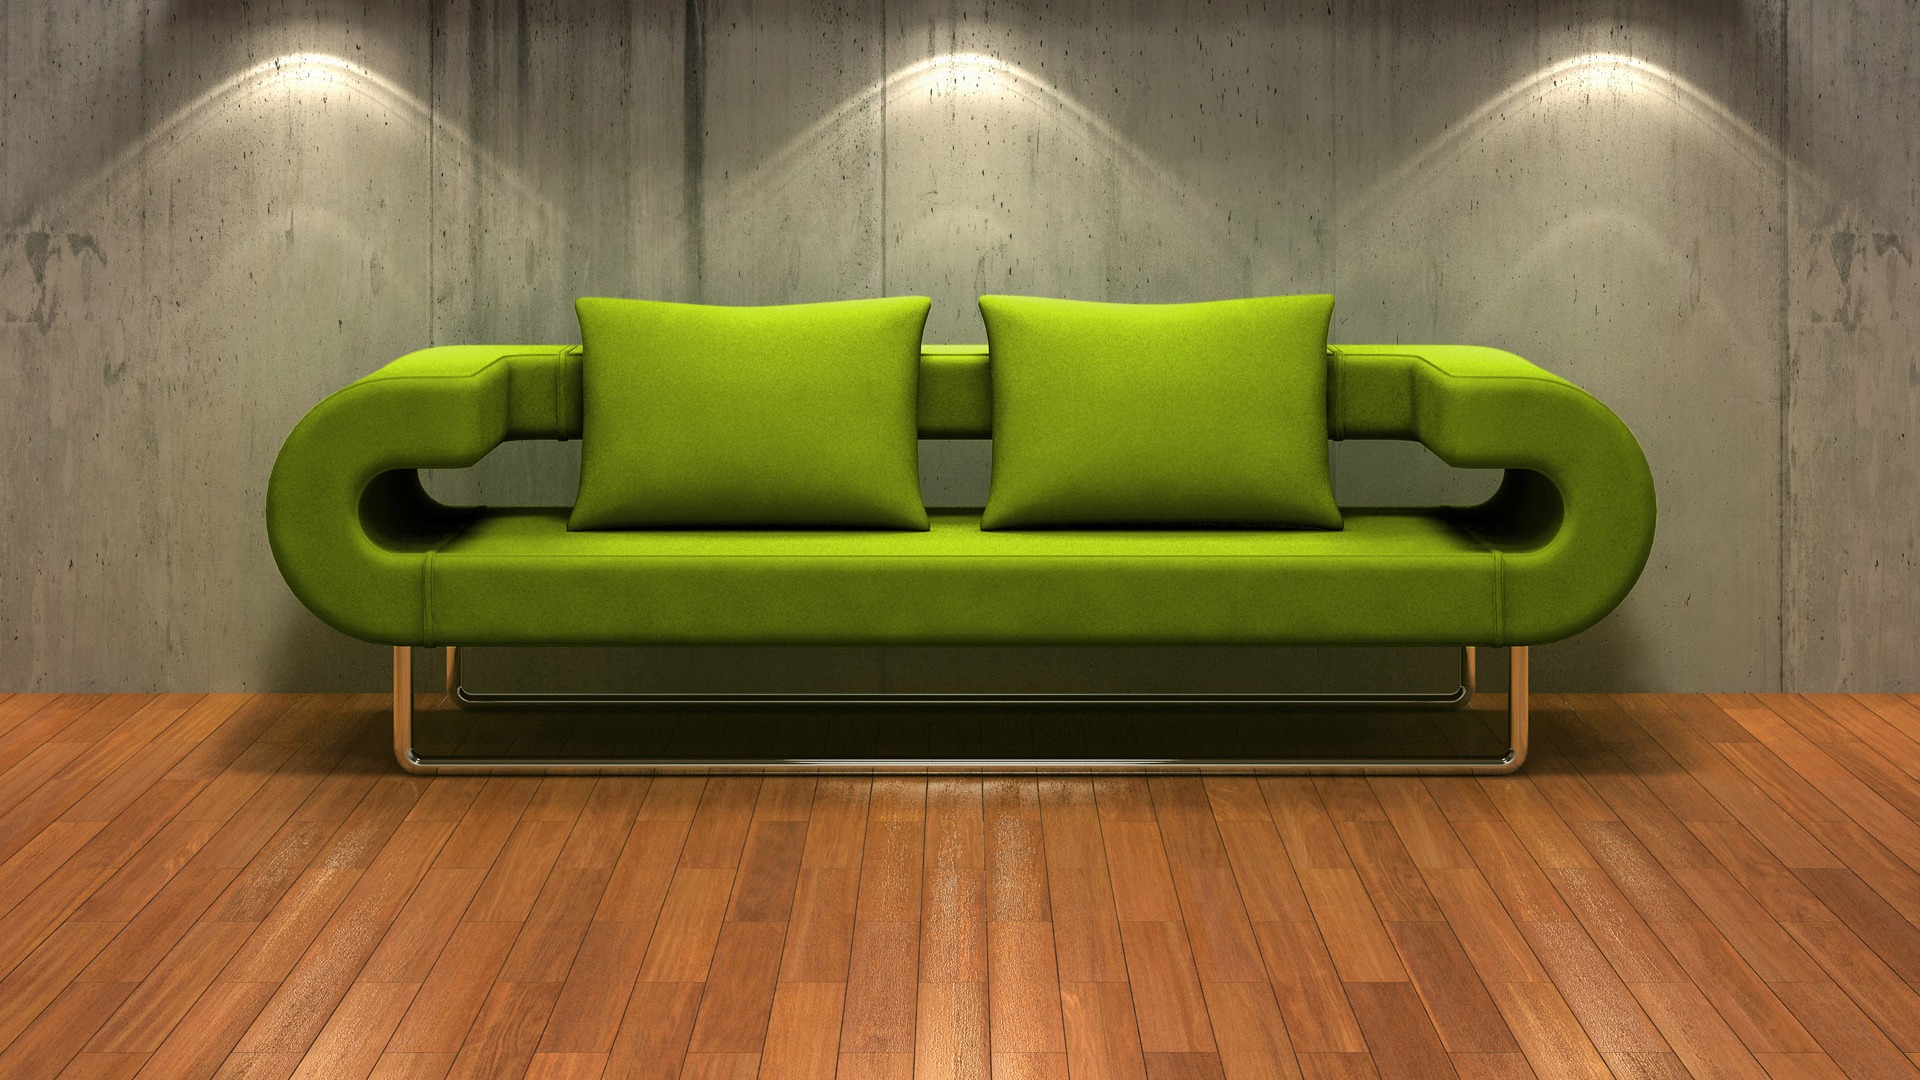 3D Couch Wallpaper Interior Design Other Wallpapers In Jpg Format